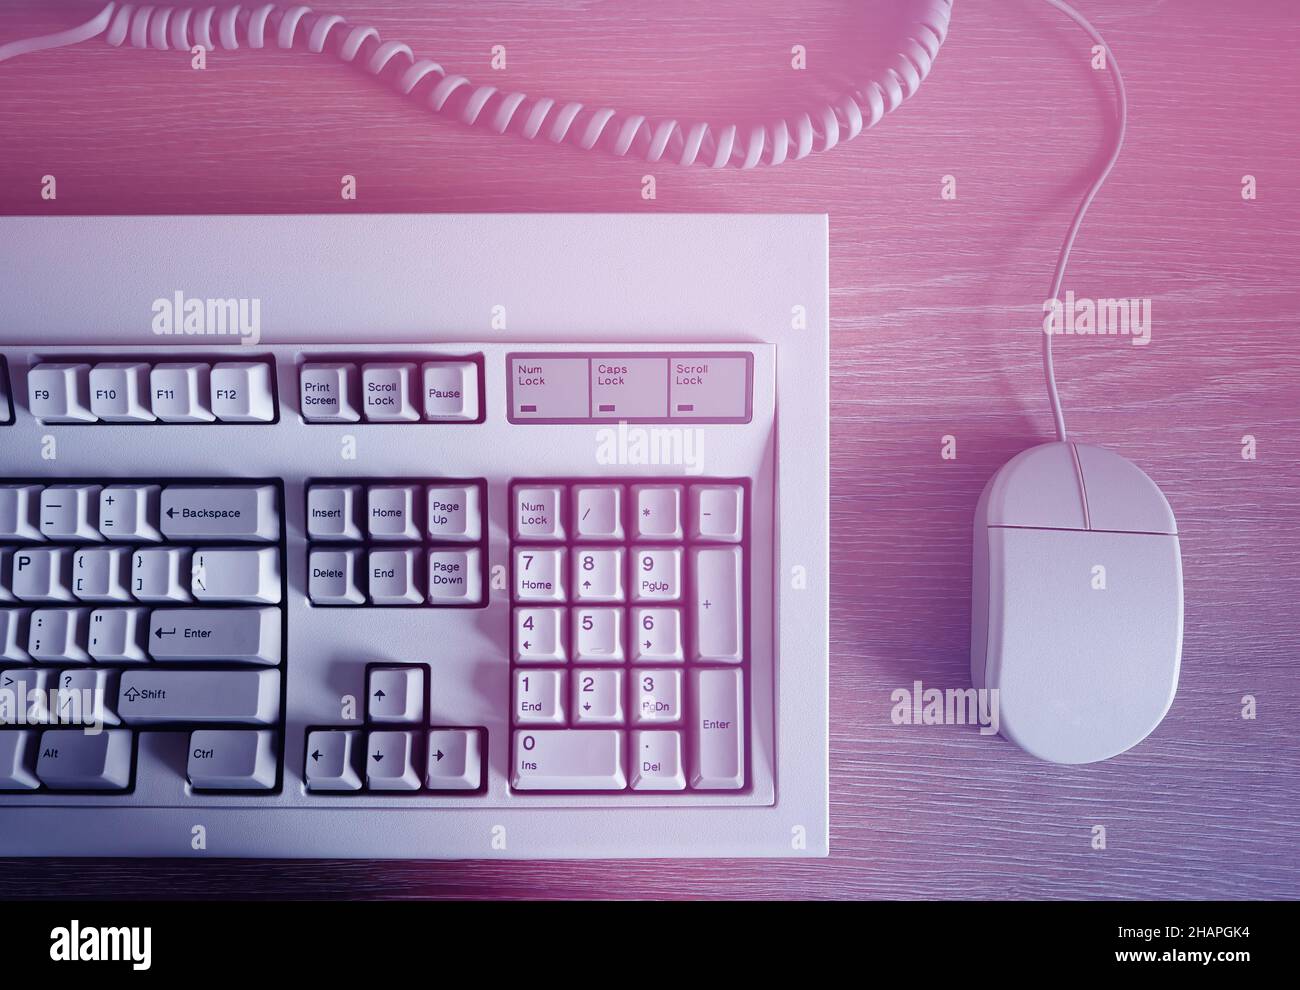 Retro computer keyboard& mouse in light leak Stock Photo